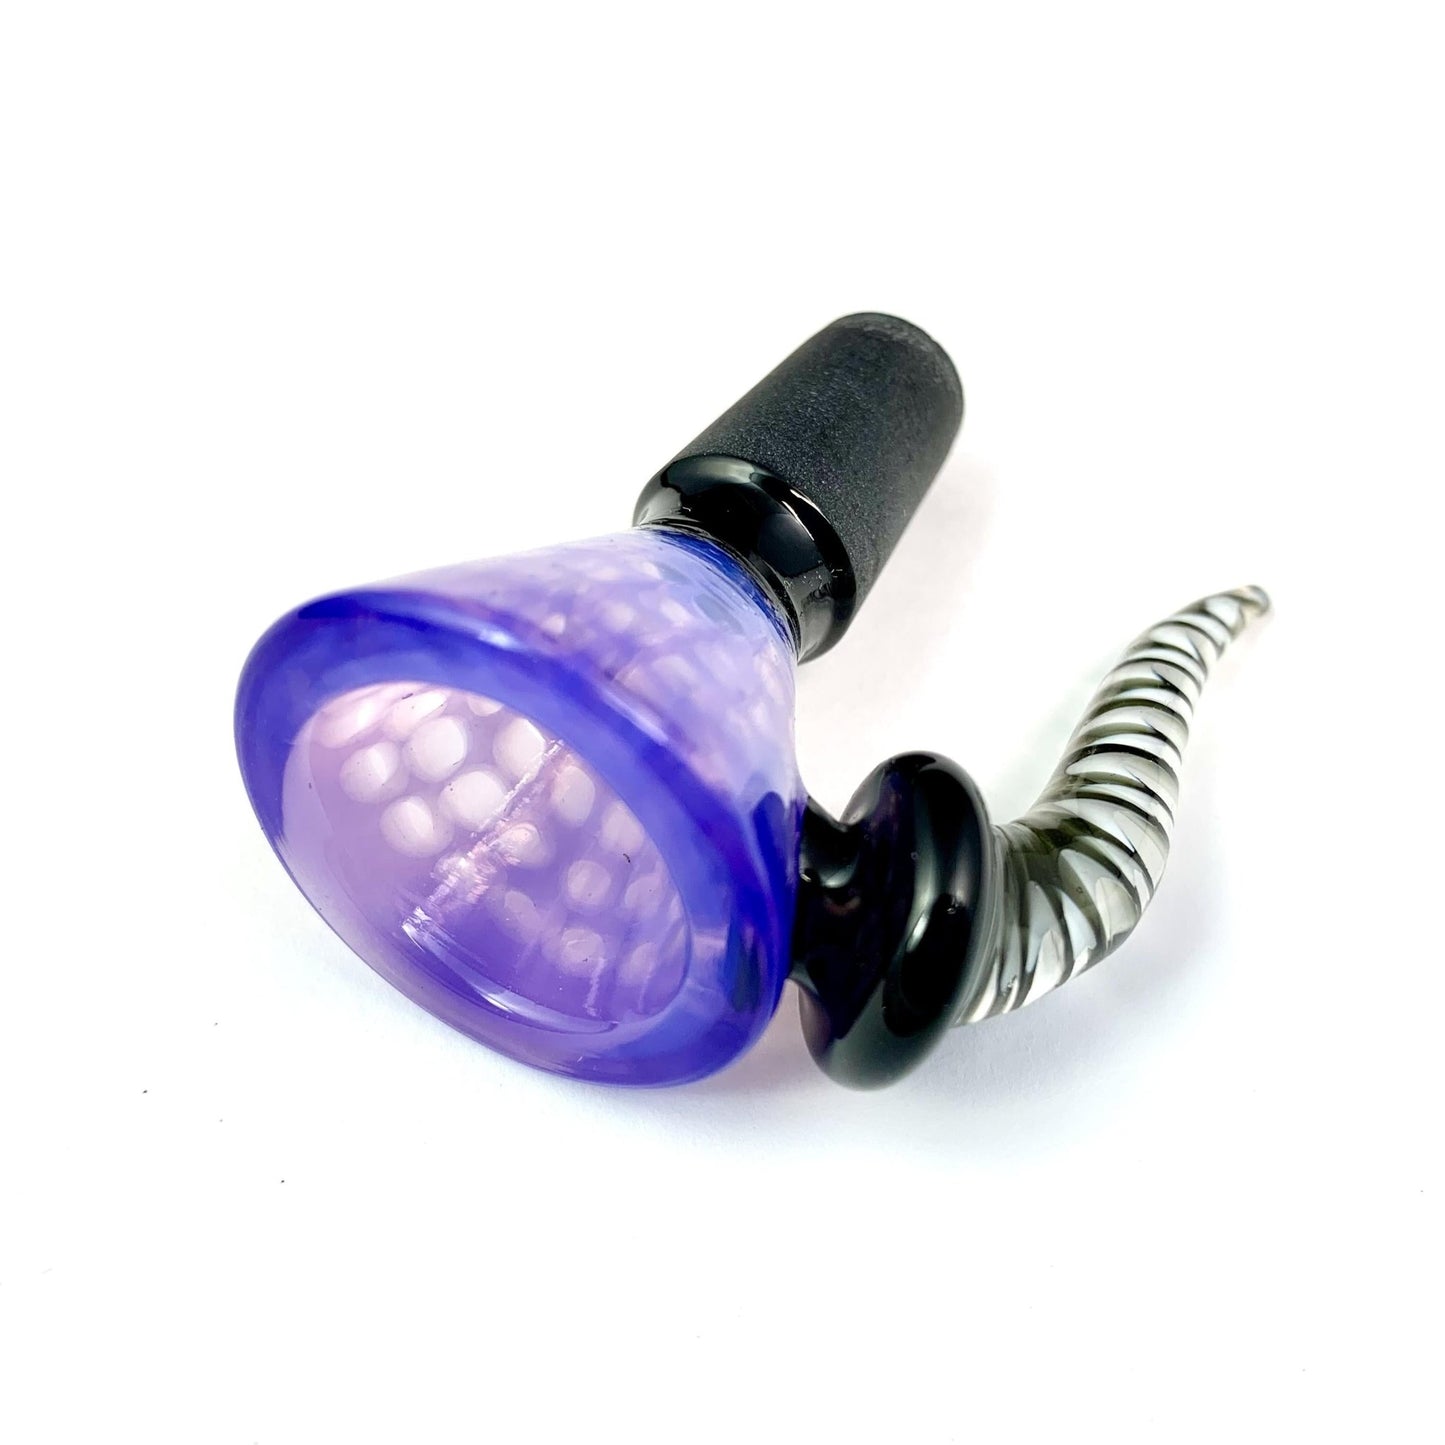 14mm Purple Rams Horn Cone Piece Male - The Bong Baron